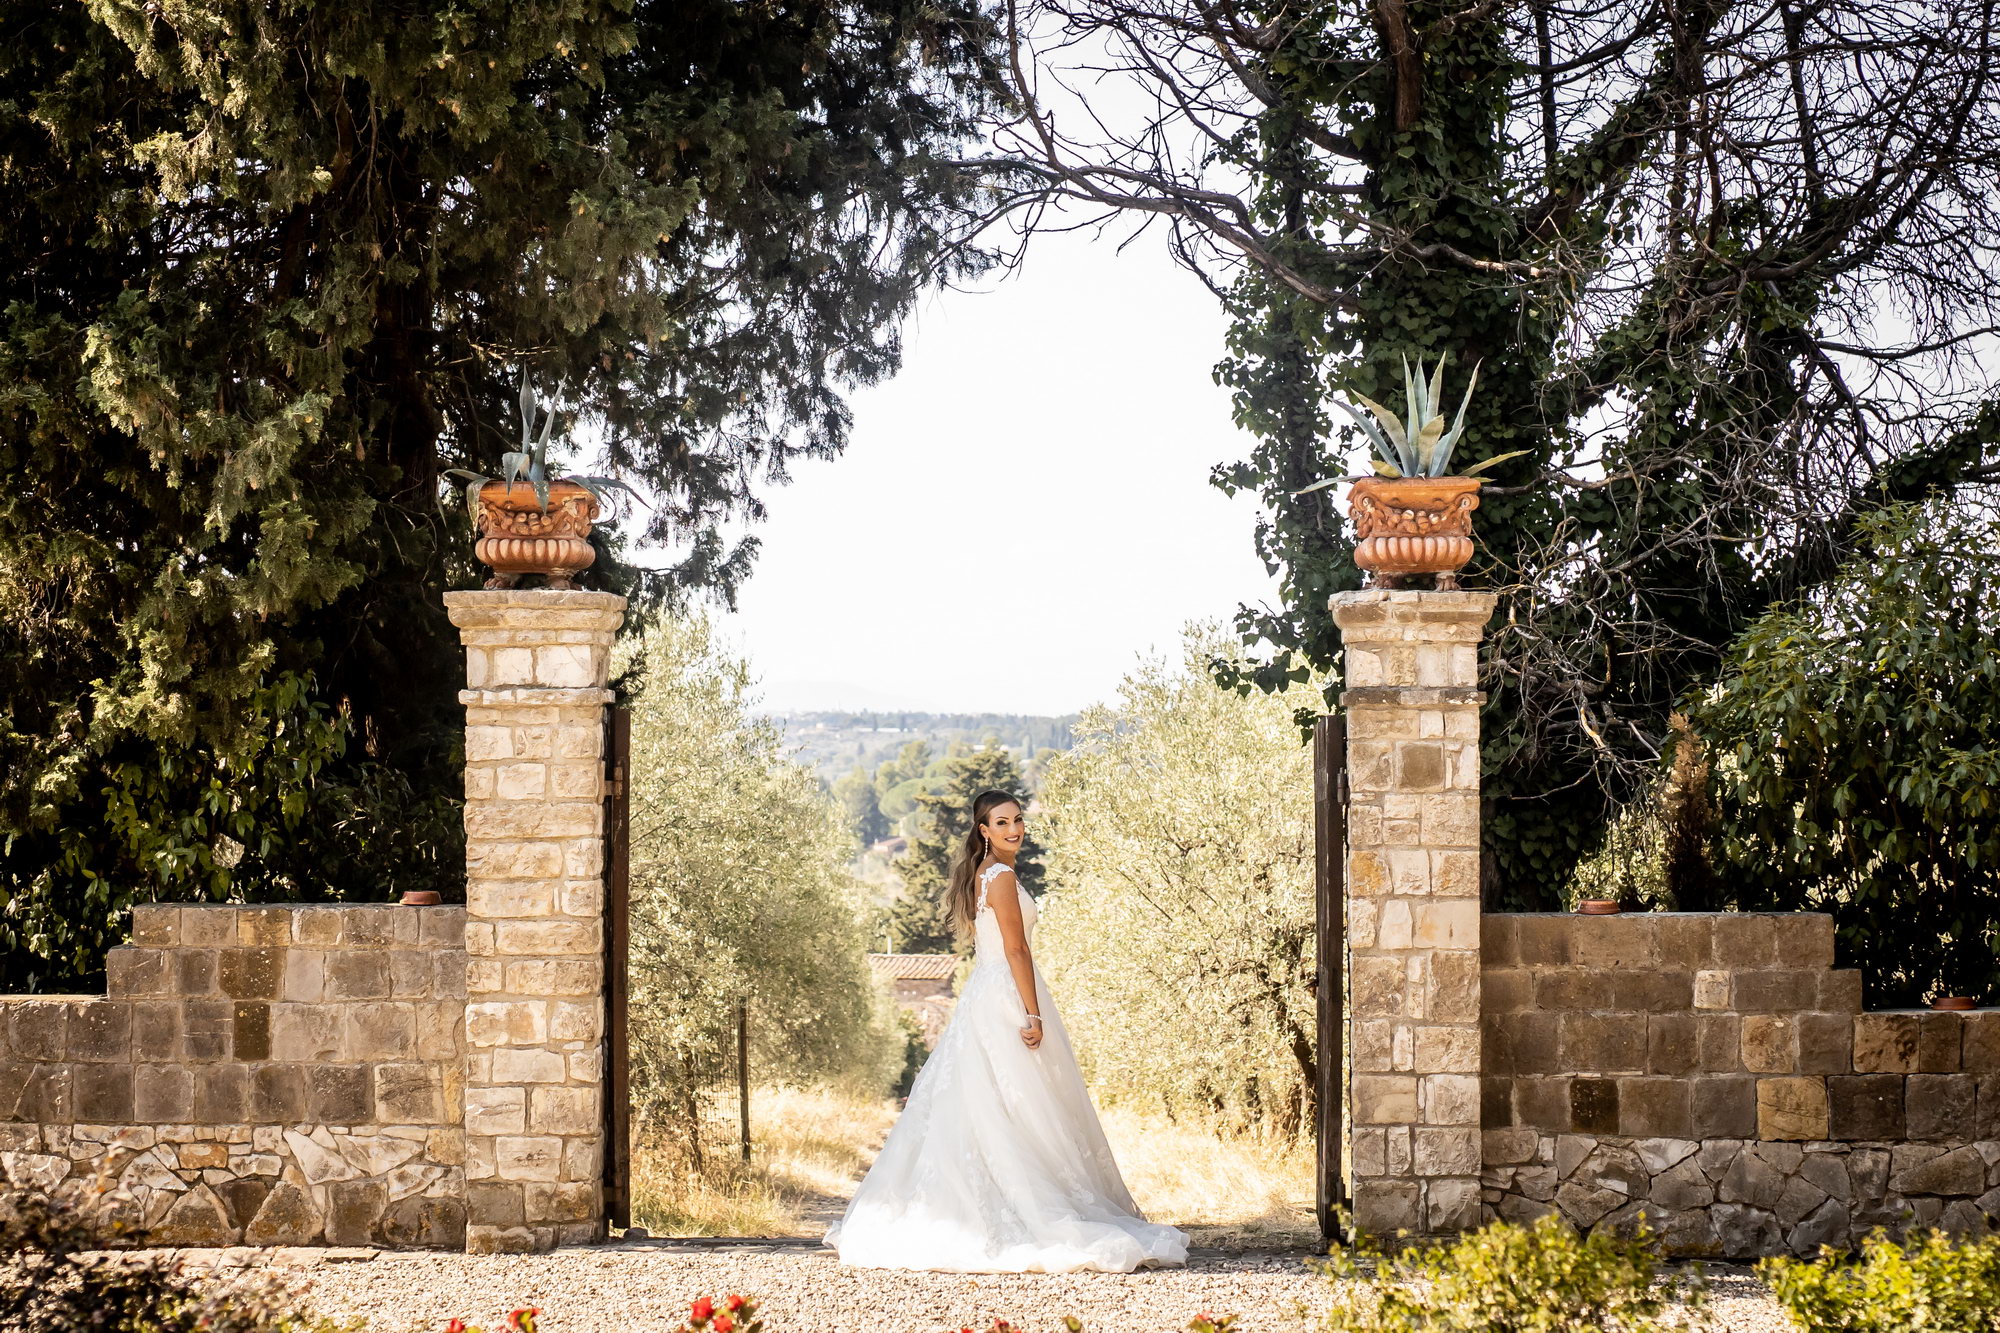 ..imagesweddings enthe dream of getting married in Italy wedding photographers photo27_002 by Photo27